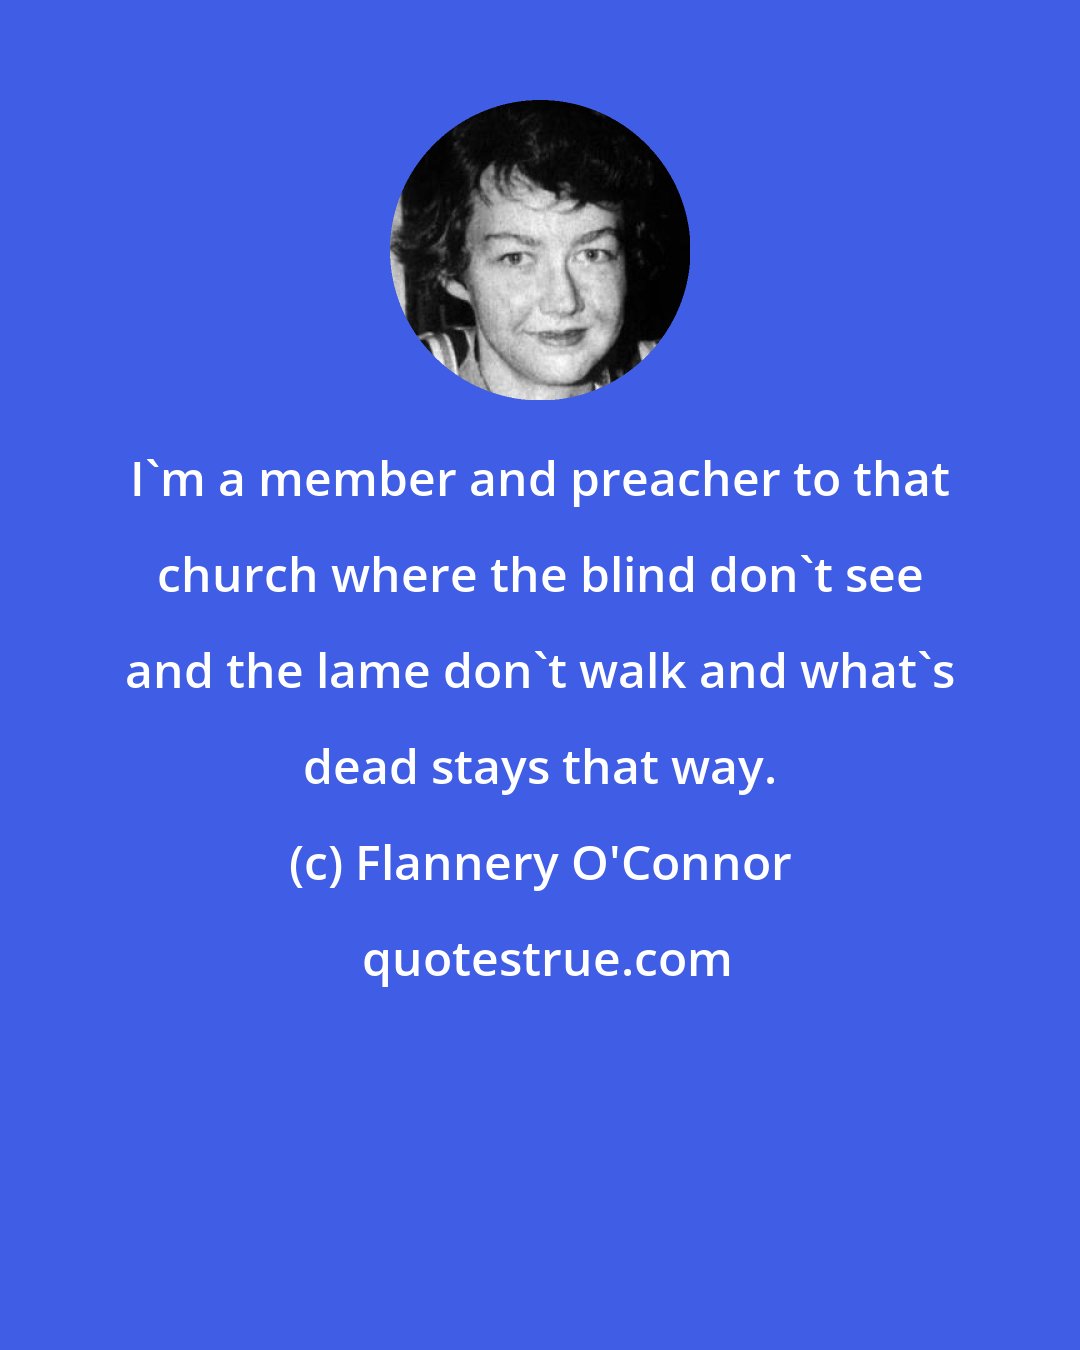 Flannery O'Connor: I'm a member and preacher to that church where the blind don't see and the lame don't walk and what's dead stays that way.